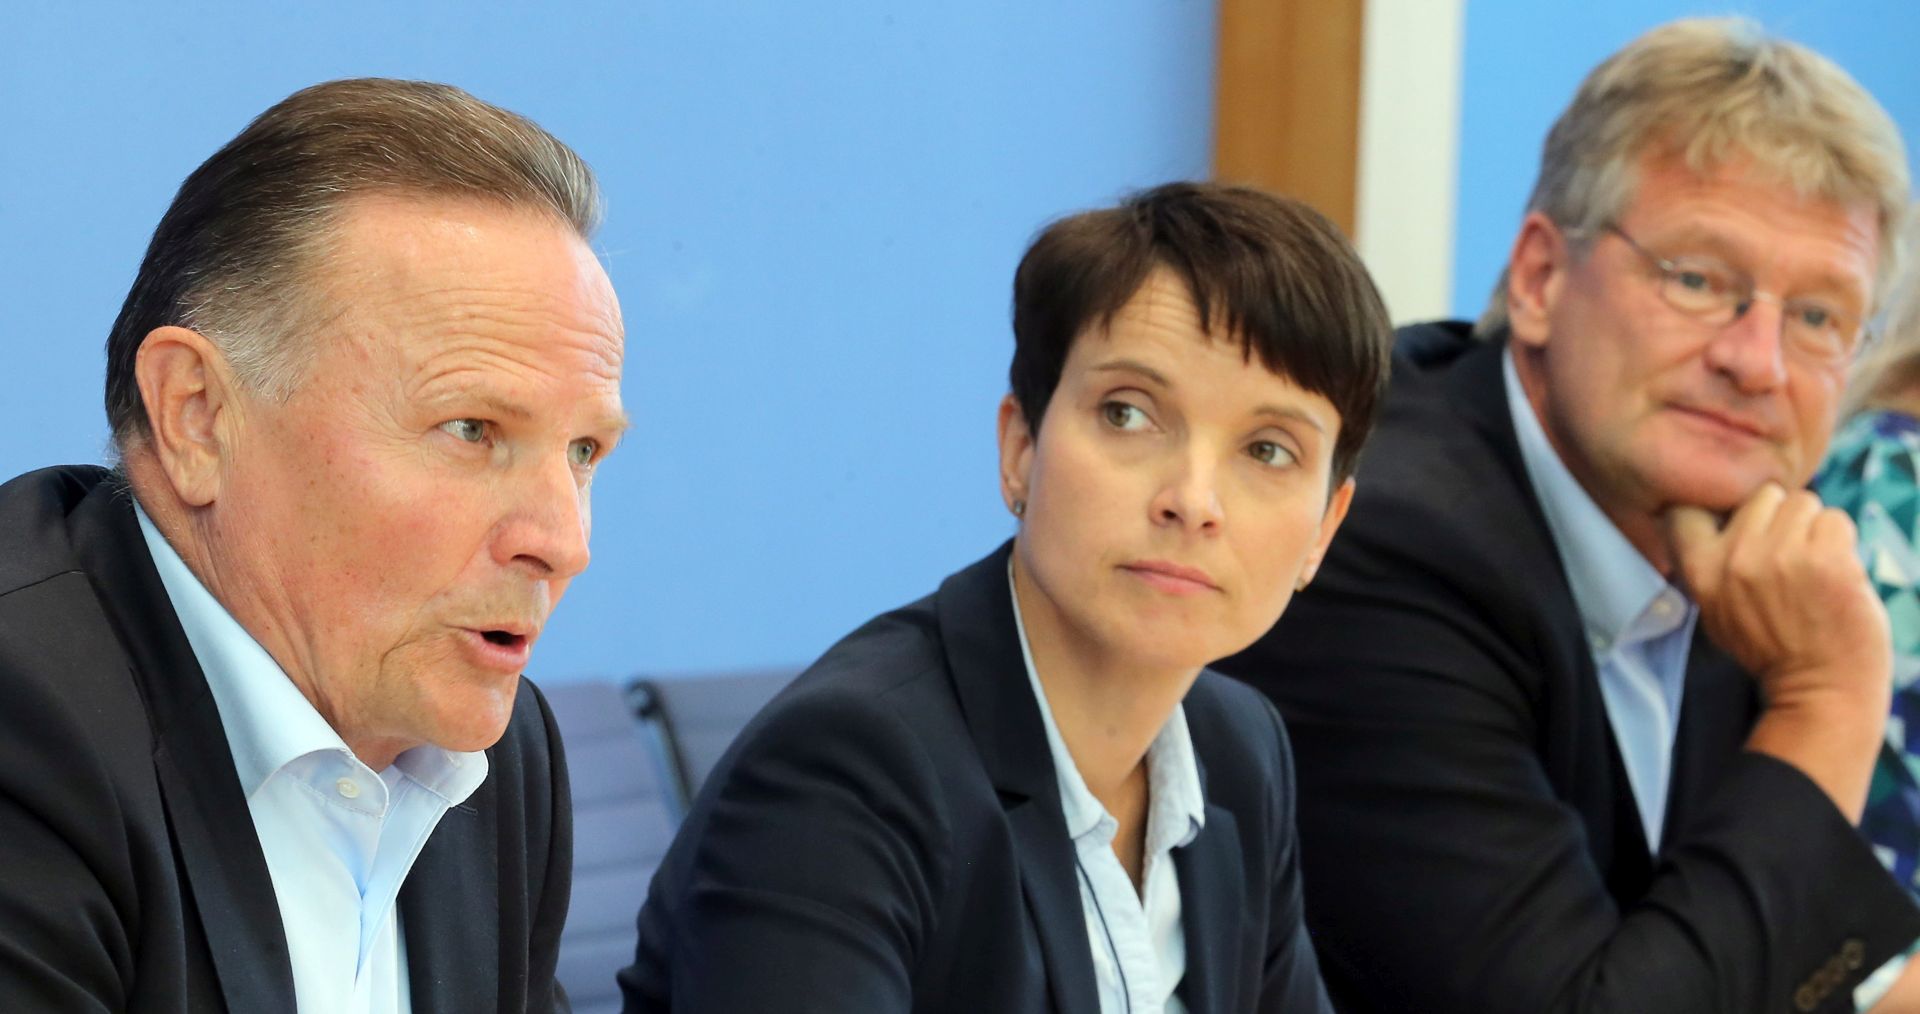 epa05547749 Alternative for Germany (AfD) prime candidate (L-R) Georg Pazderski and AfD party leaders Frauke Petry and Joerg Meuthen answer questions during a press conference in the wake of the Berlin House of Representatives elections, in Berlin, Germany, 19 September 2016.  EPA/WOLFGANG KUMM